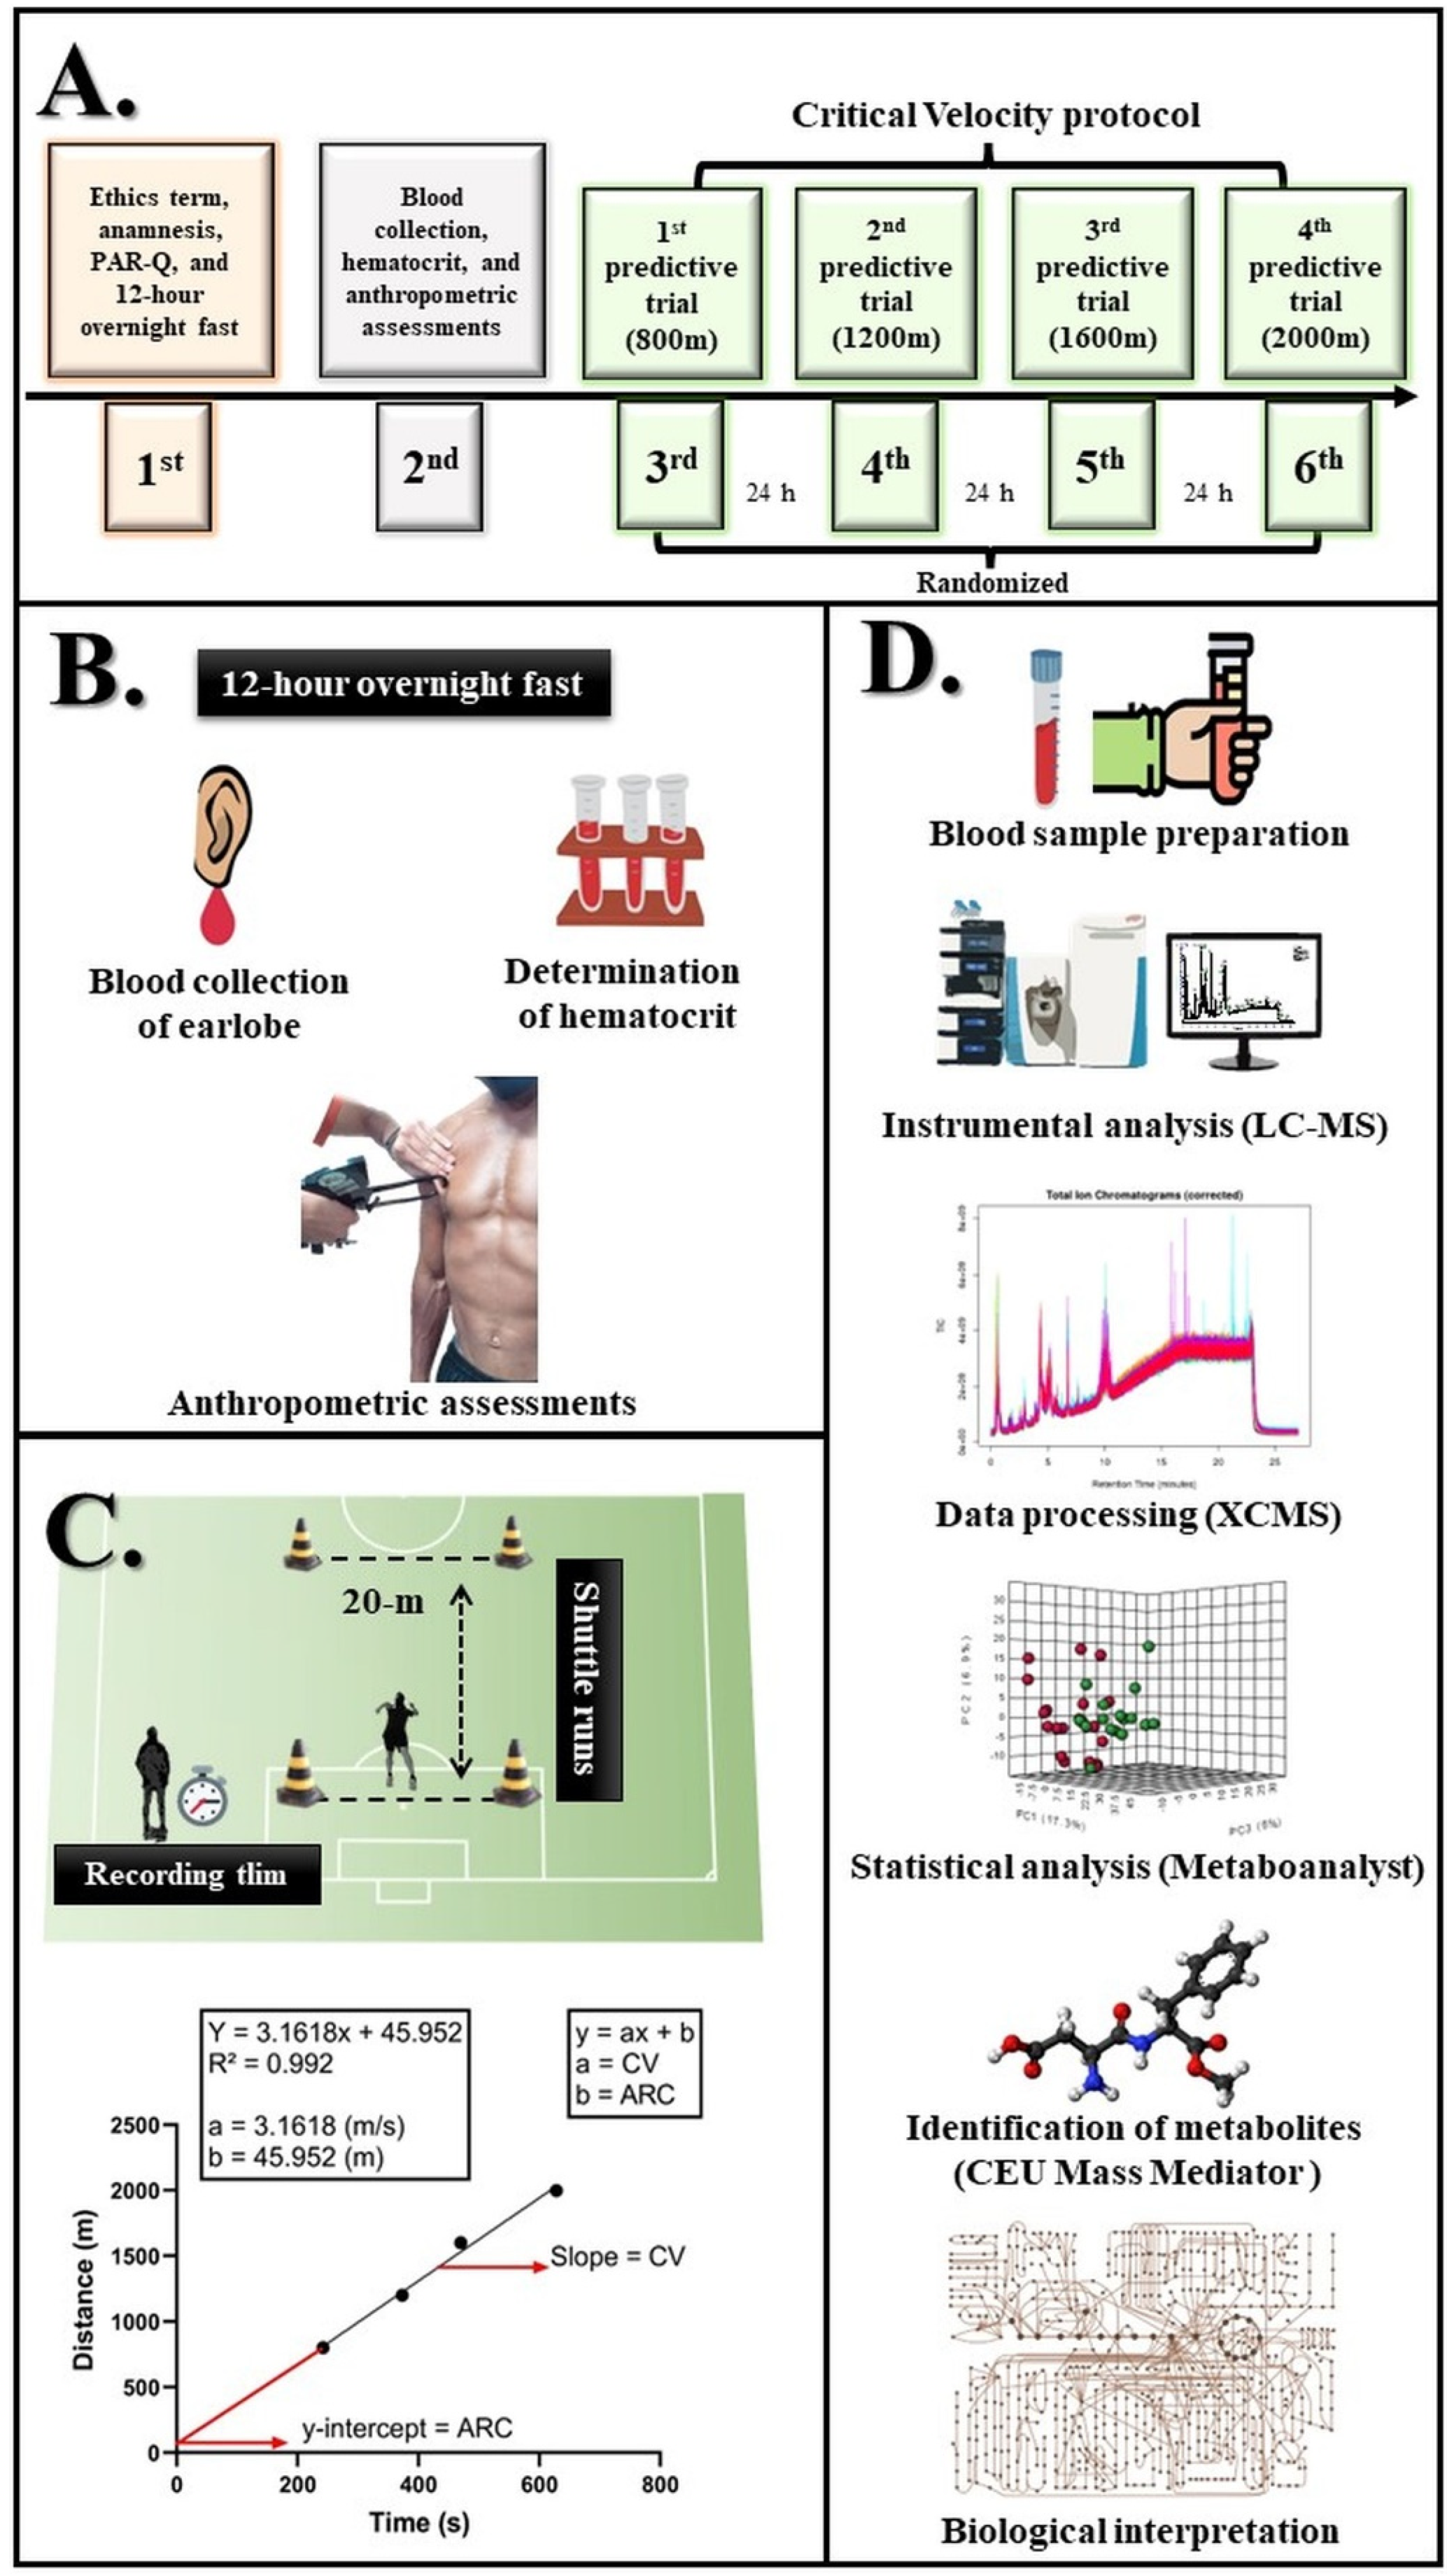 Biology Free Full-Text A Metabolomic Approach and Traditional Physical Assessments to Compare U22 Soccer Players According to Their Competitive Level